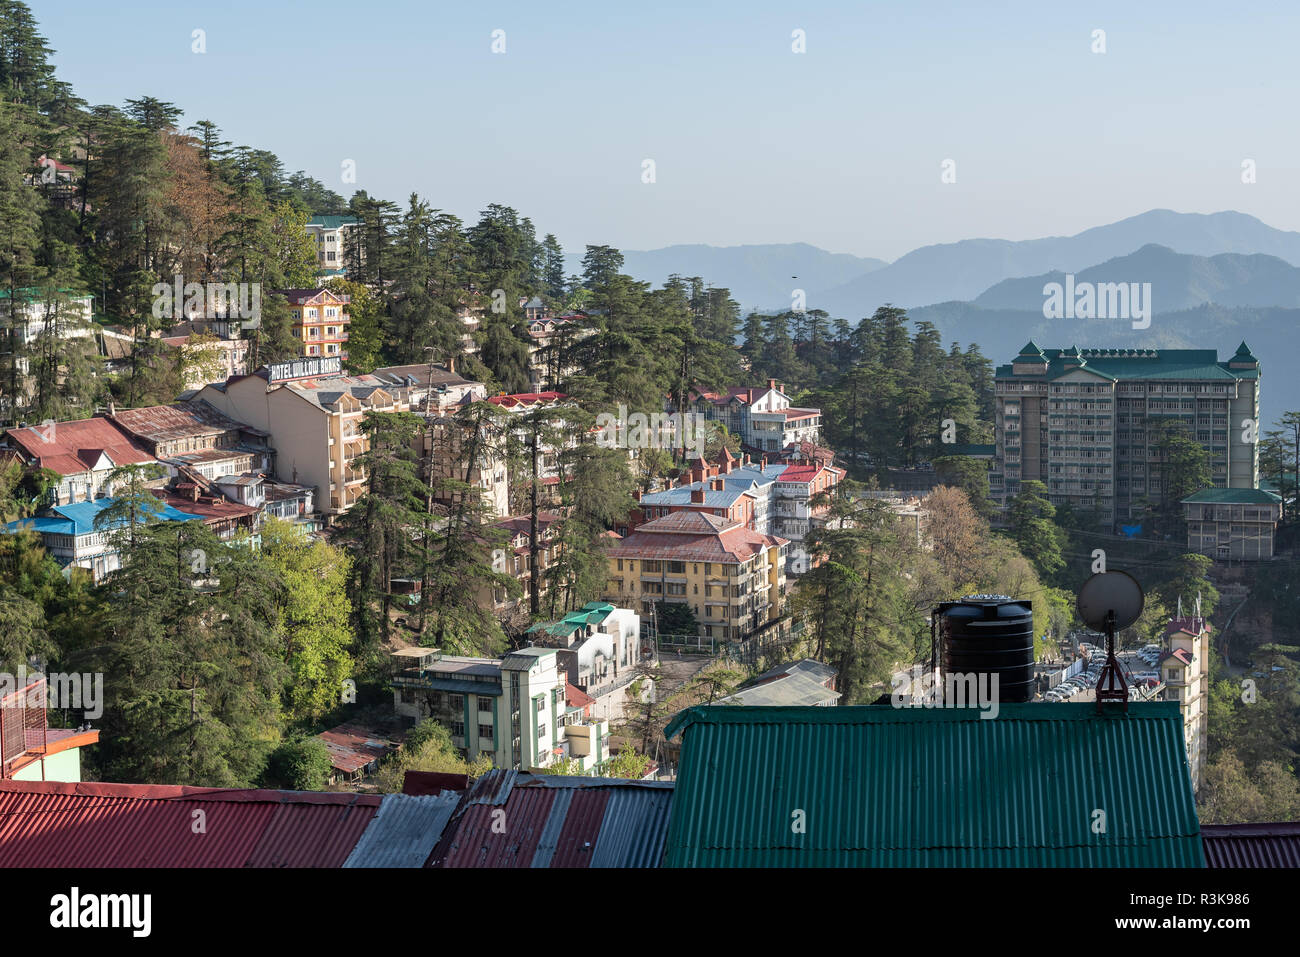 View of Shimla (Simla) from a high vantage point with the High Court, Shimla, Himachal Pradesh, India Stock Photo